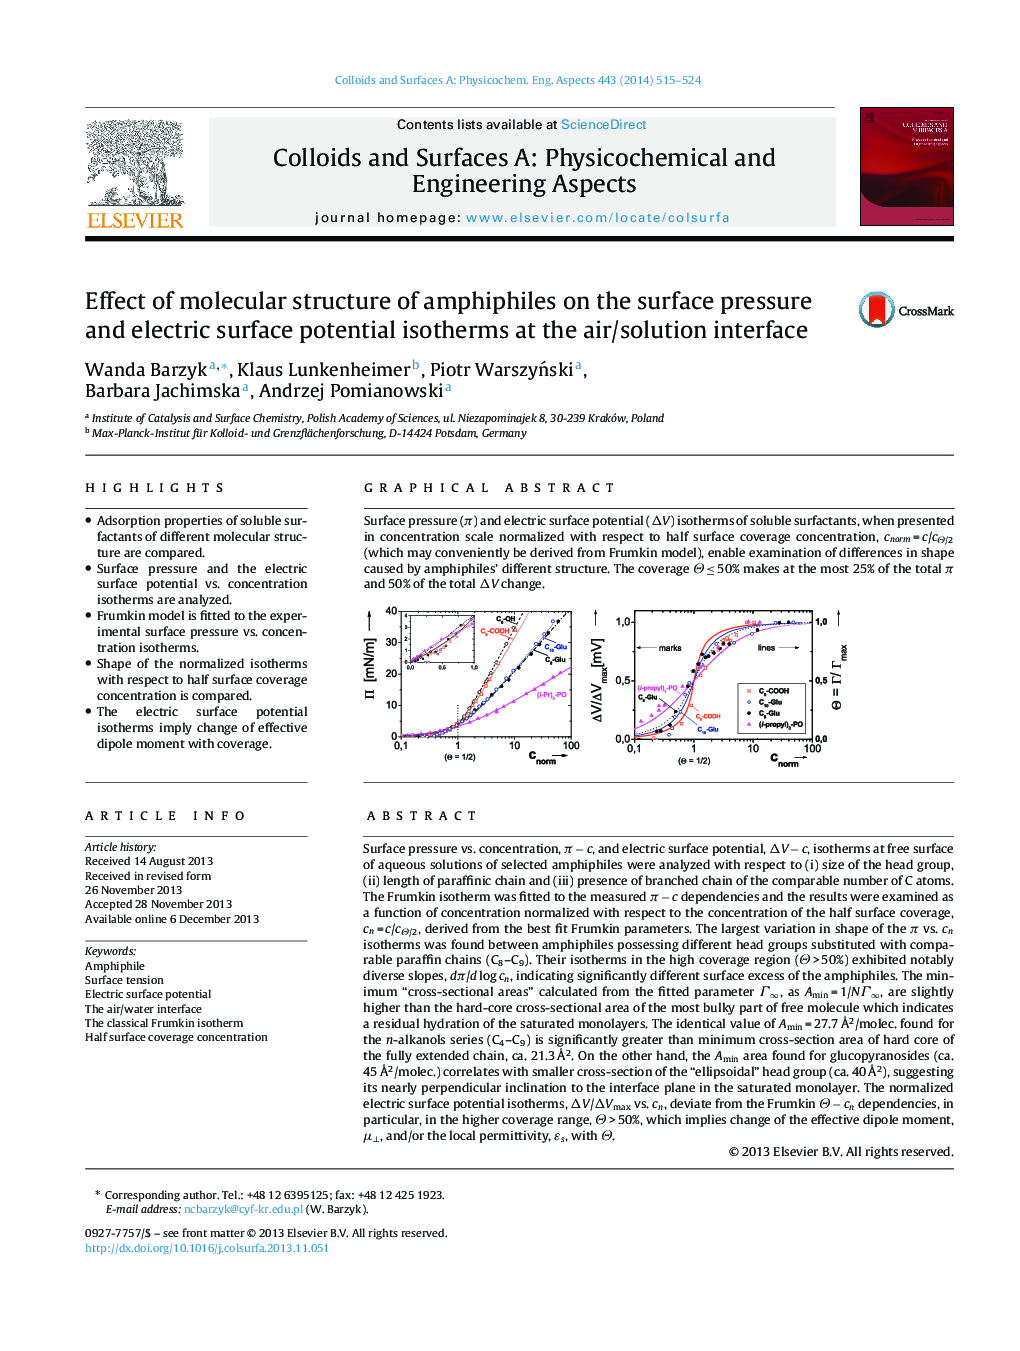 Effect of molecular structure of amphiphiles on the surface pressure and electric surface potential isotherms at the air/solution interface